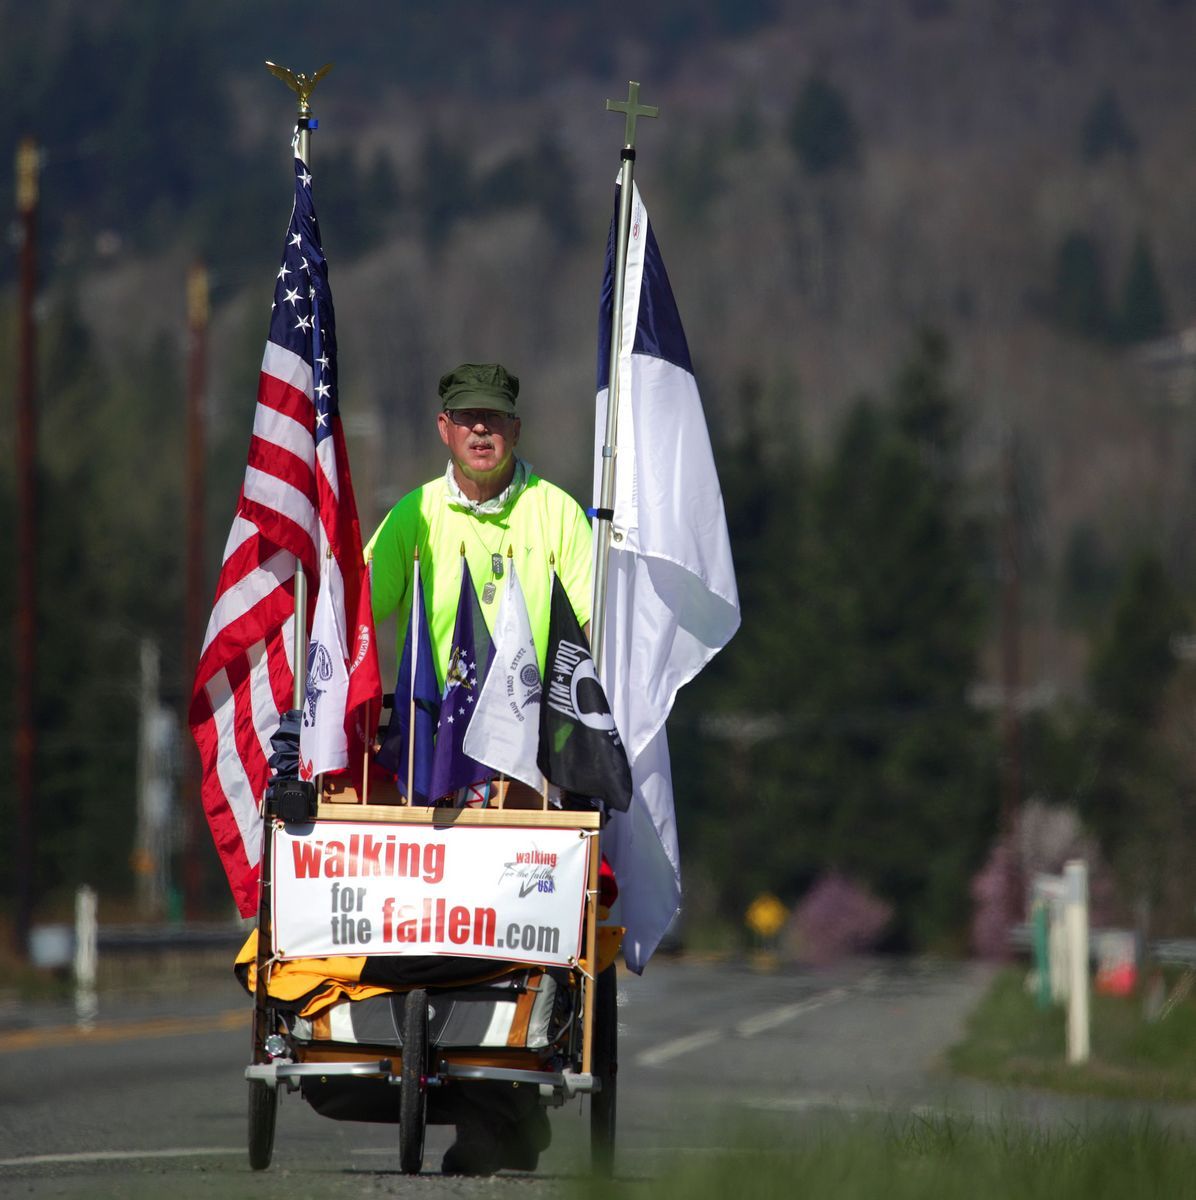 Mark Mulligan / The HeraldChuck Lewis, a Marine Corps veteran living in Ronan, Mont., walks eastbound down U.S. 2morning toward Gold Bar on Monday, the second day of a 3,300 mile, 6-month journey across the U.S.